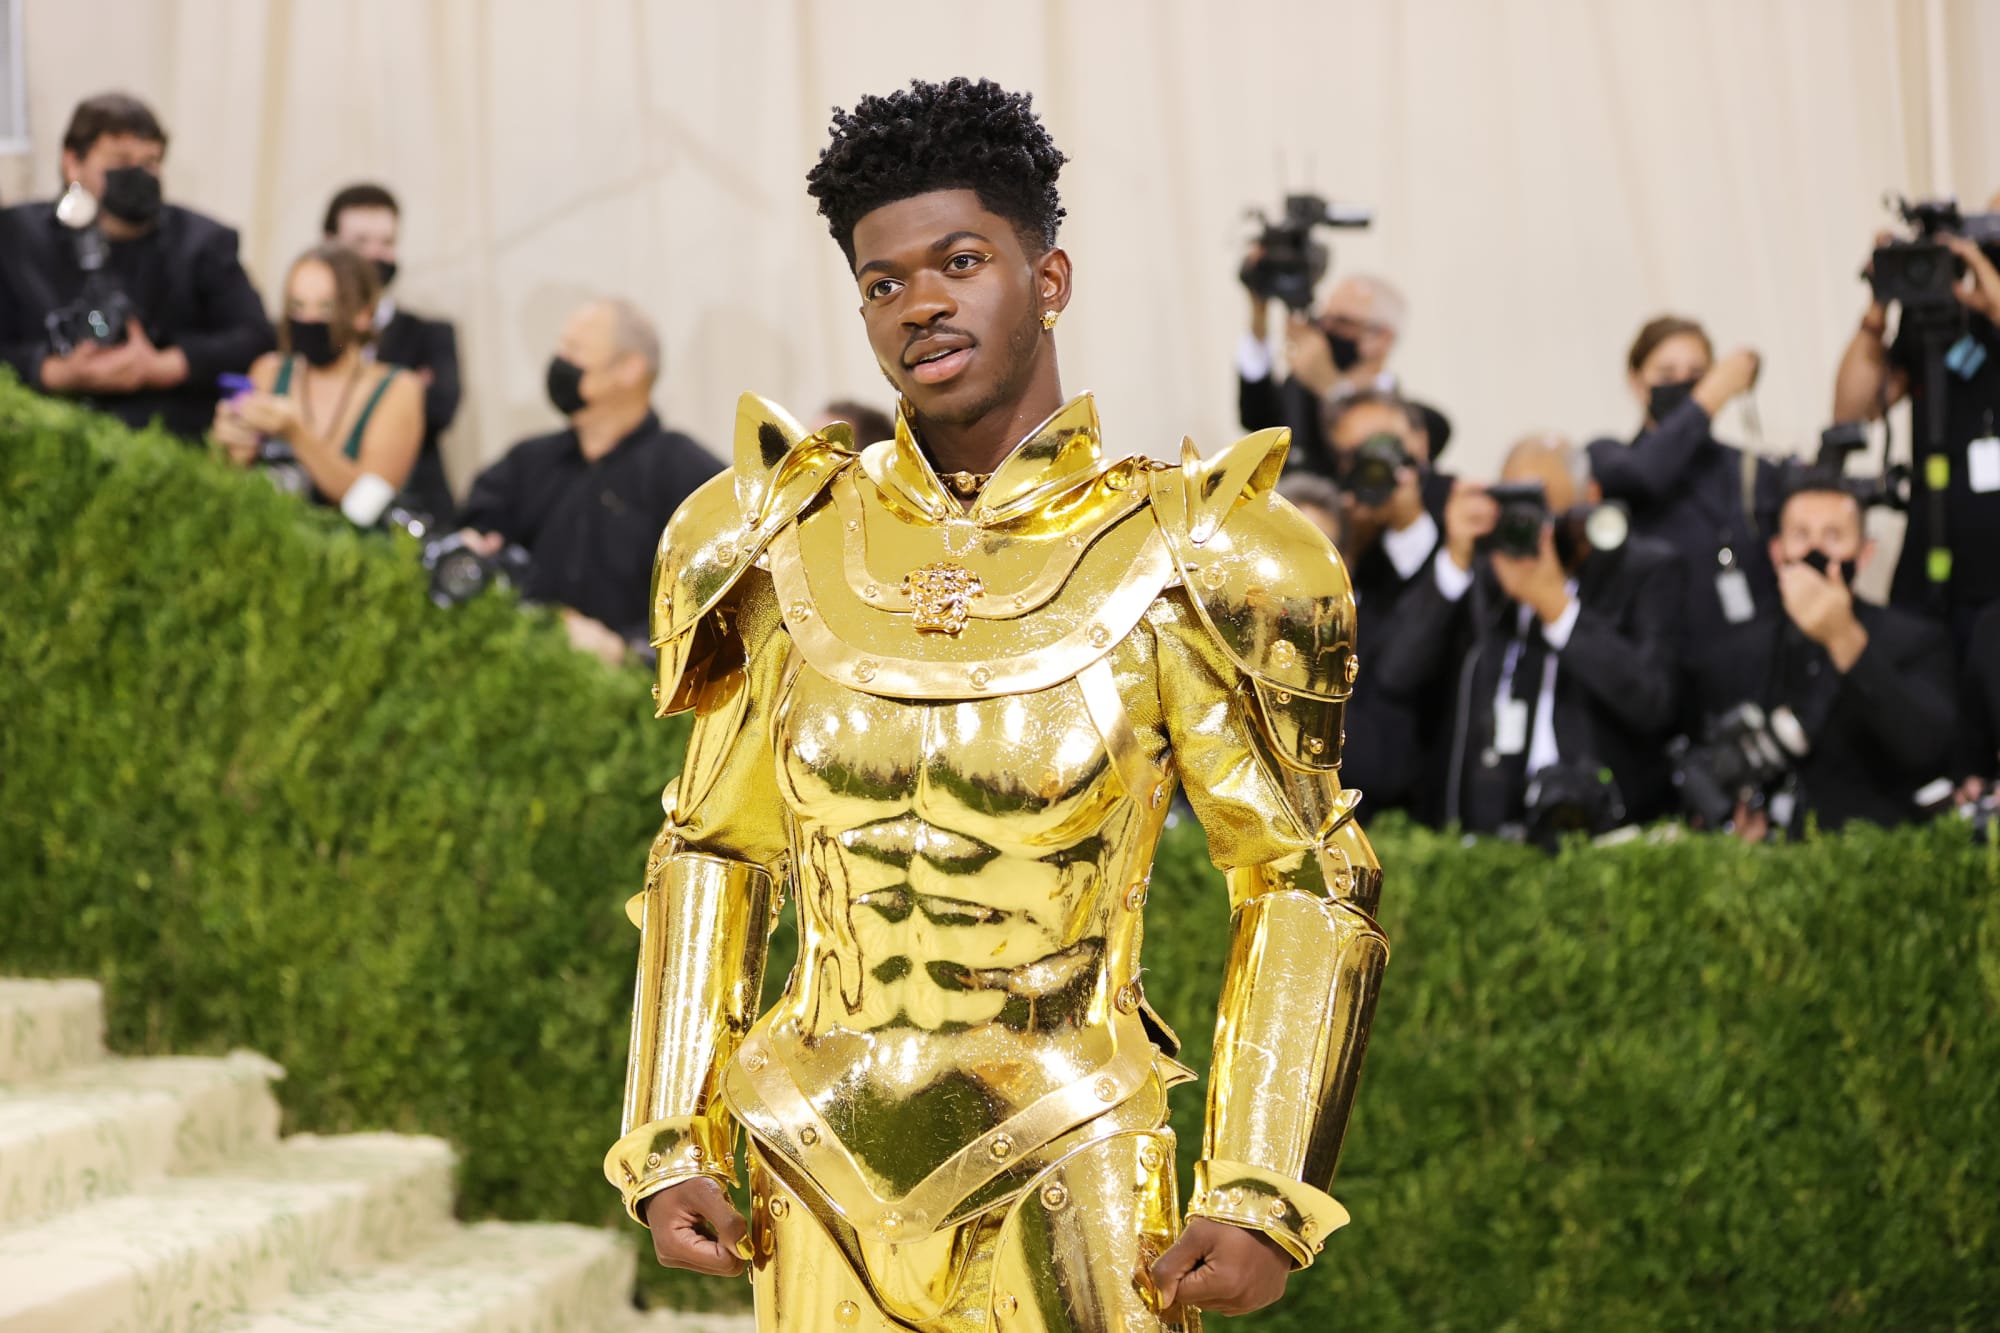 Met Gala 2021: Lil Nas X is C-3PO and other hilarious Star Wars memes